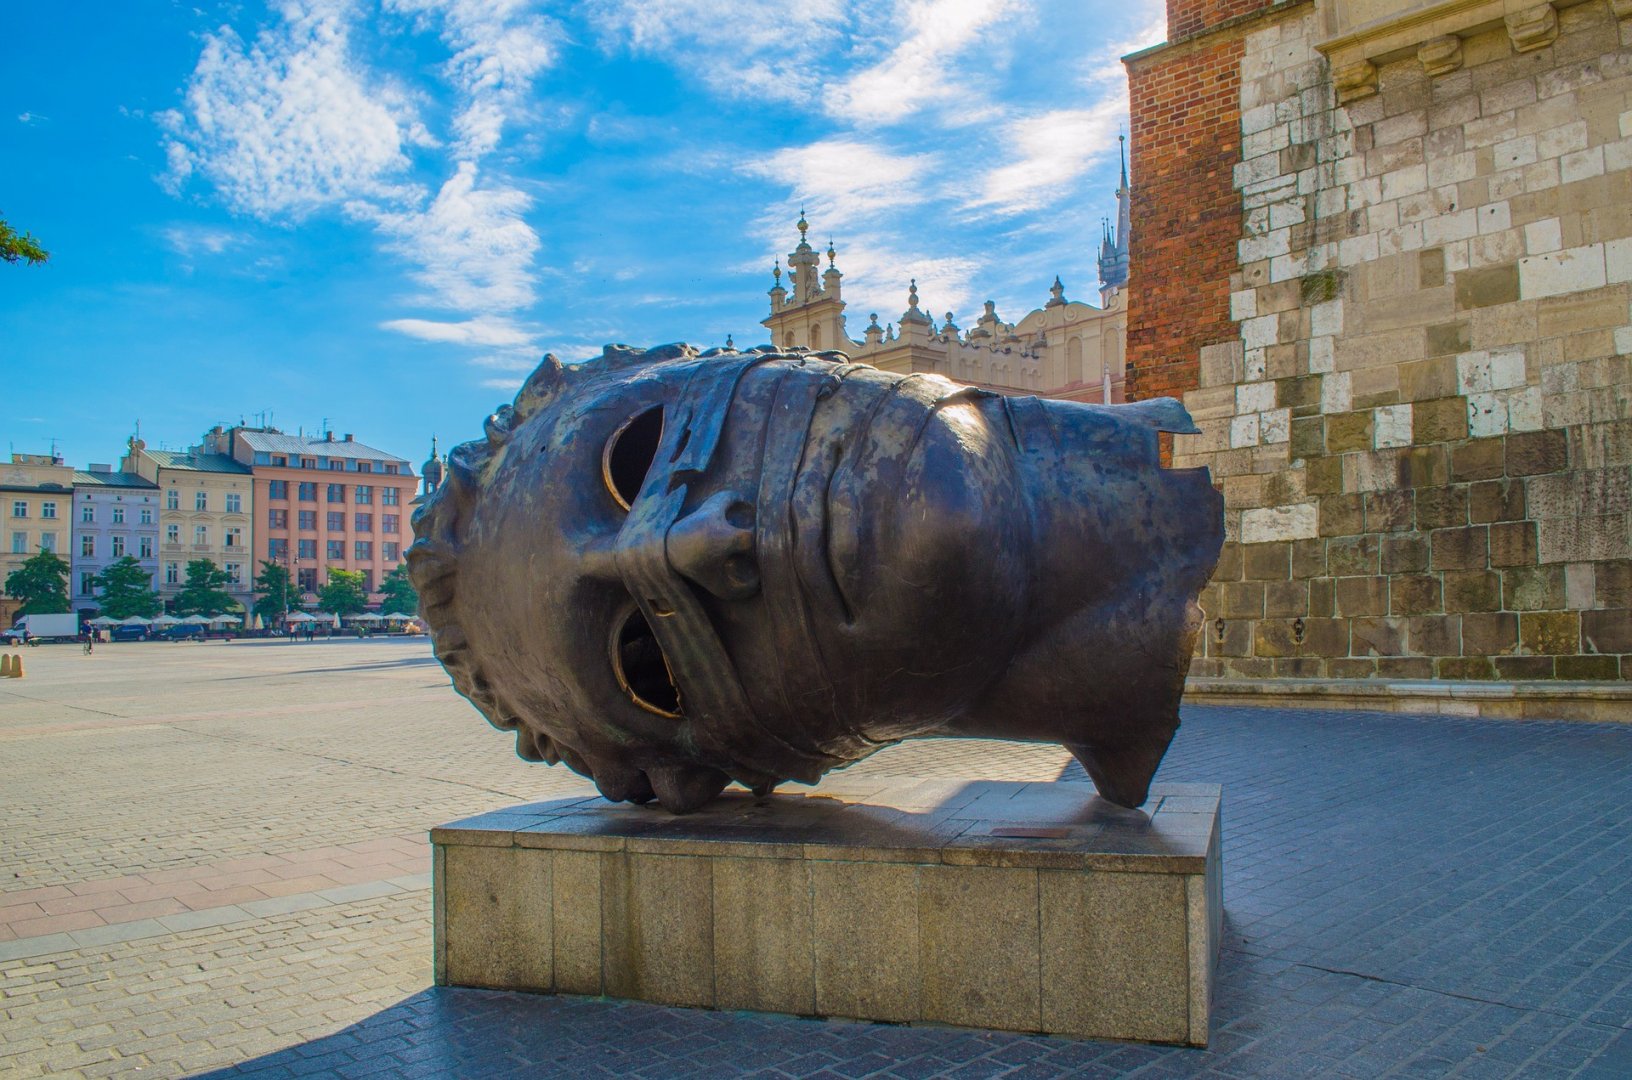 Krakow Old Town – Main Attractions